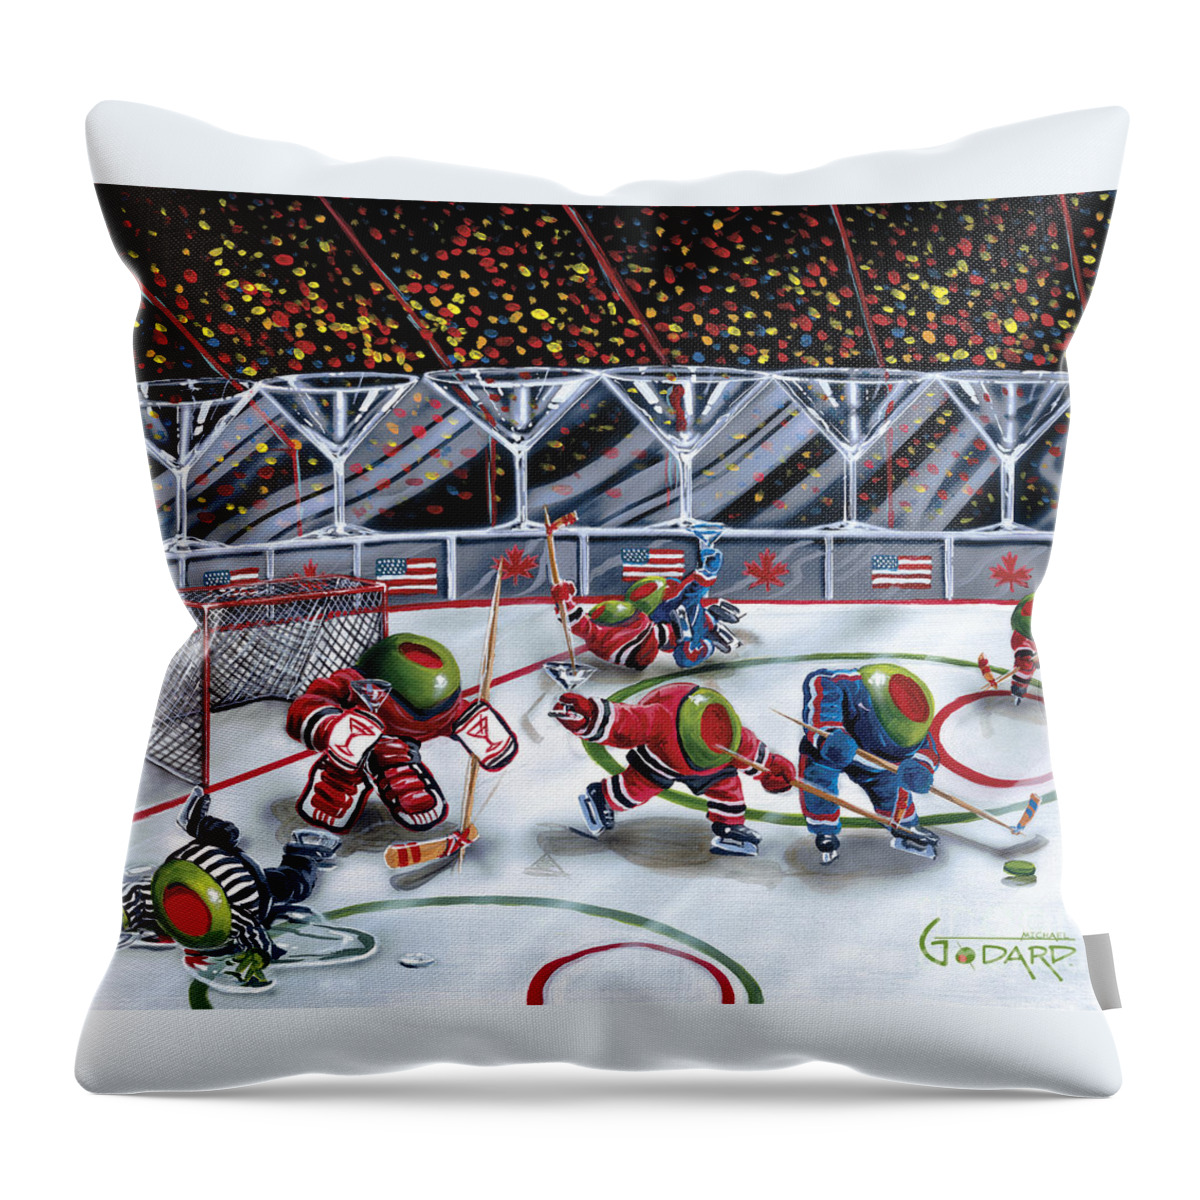 Toothpicks Throw Pillow featuring the painting We Olive Hockey by Michael Godard